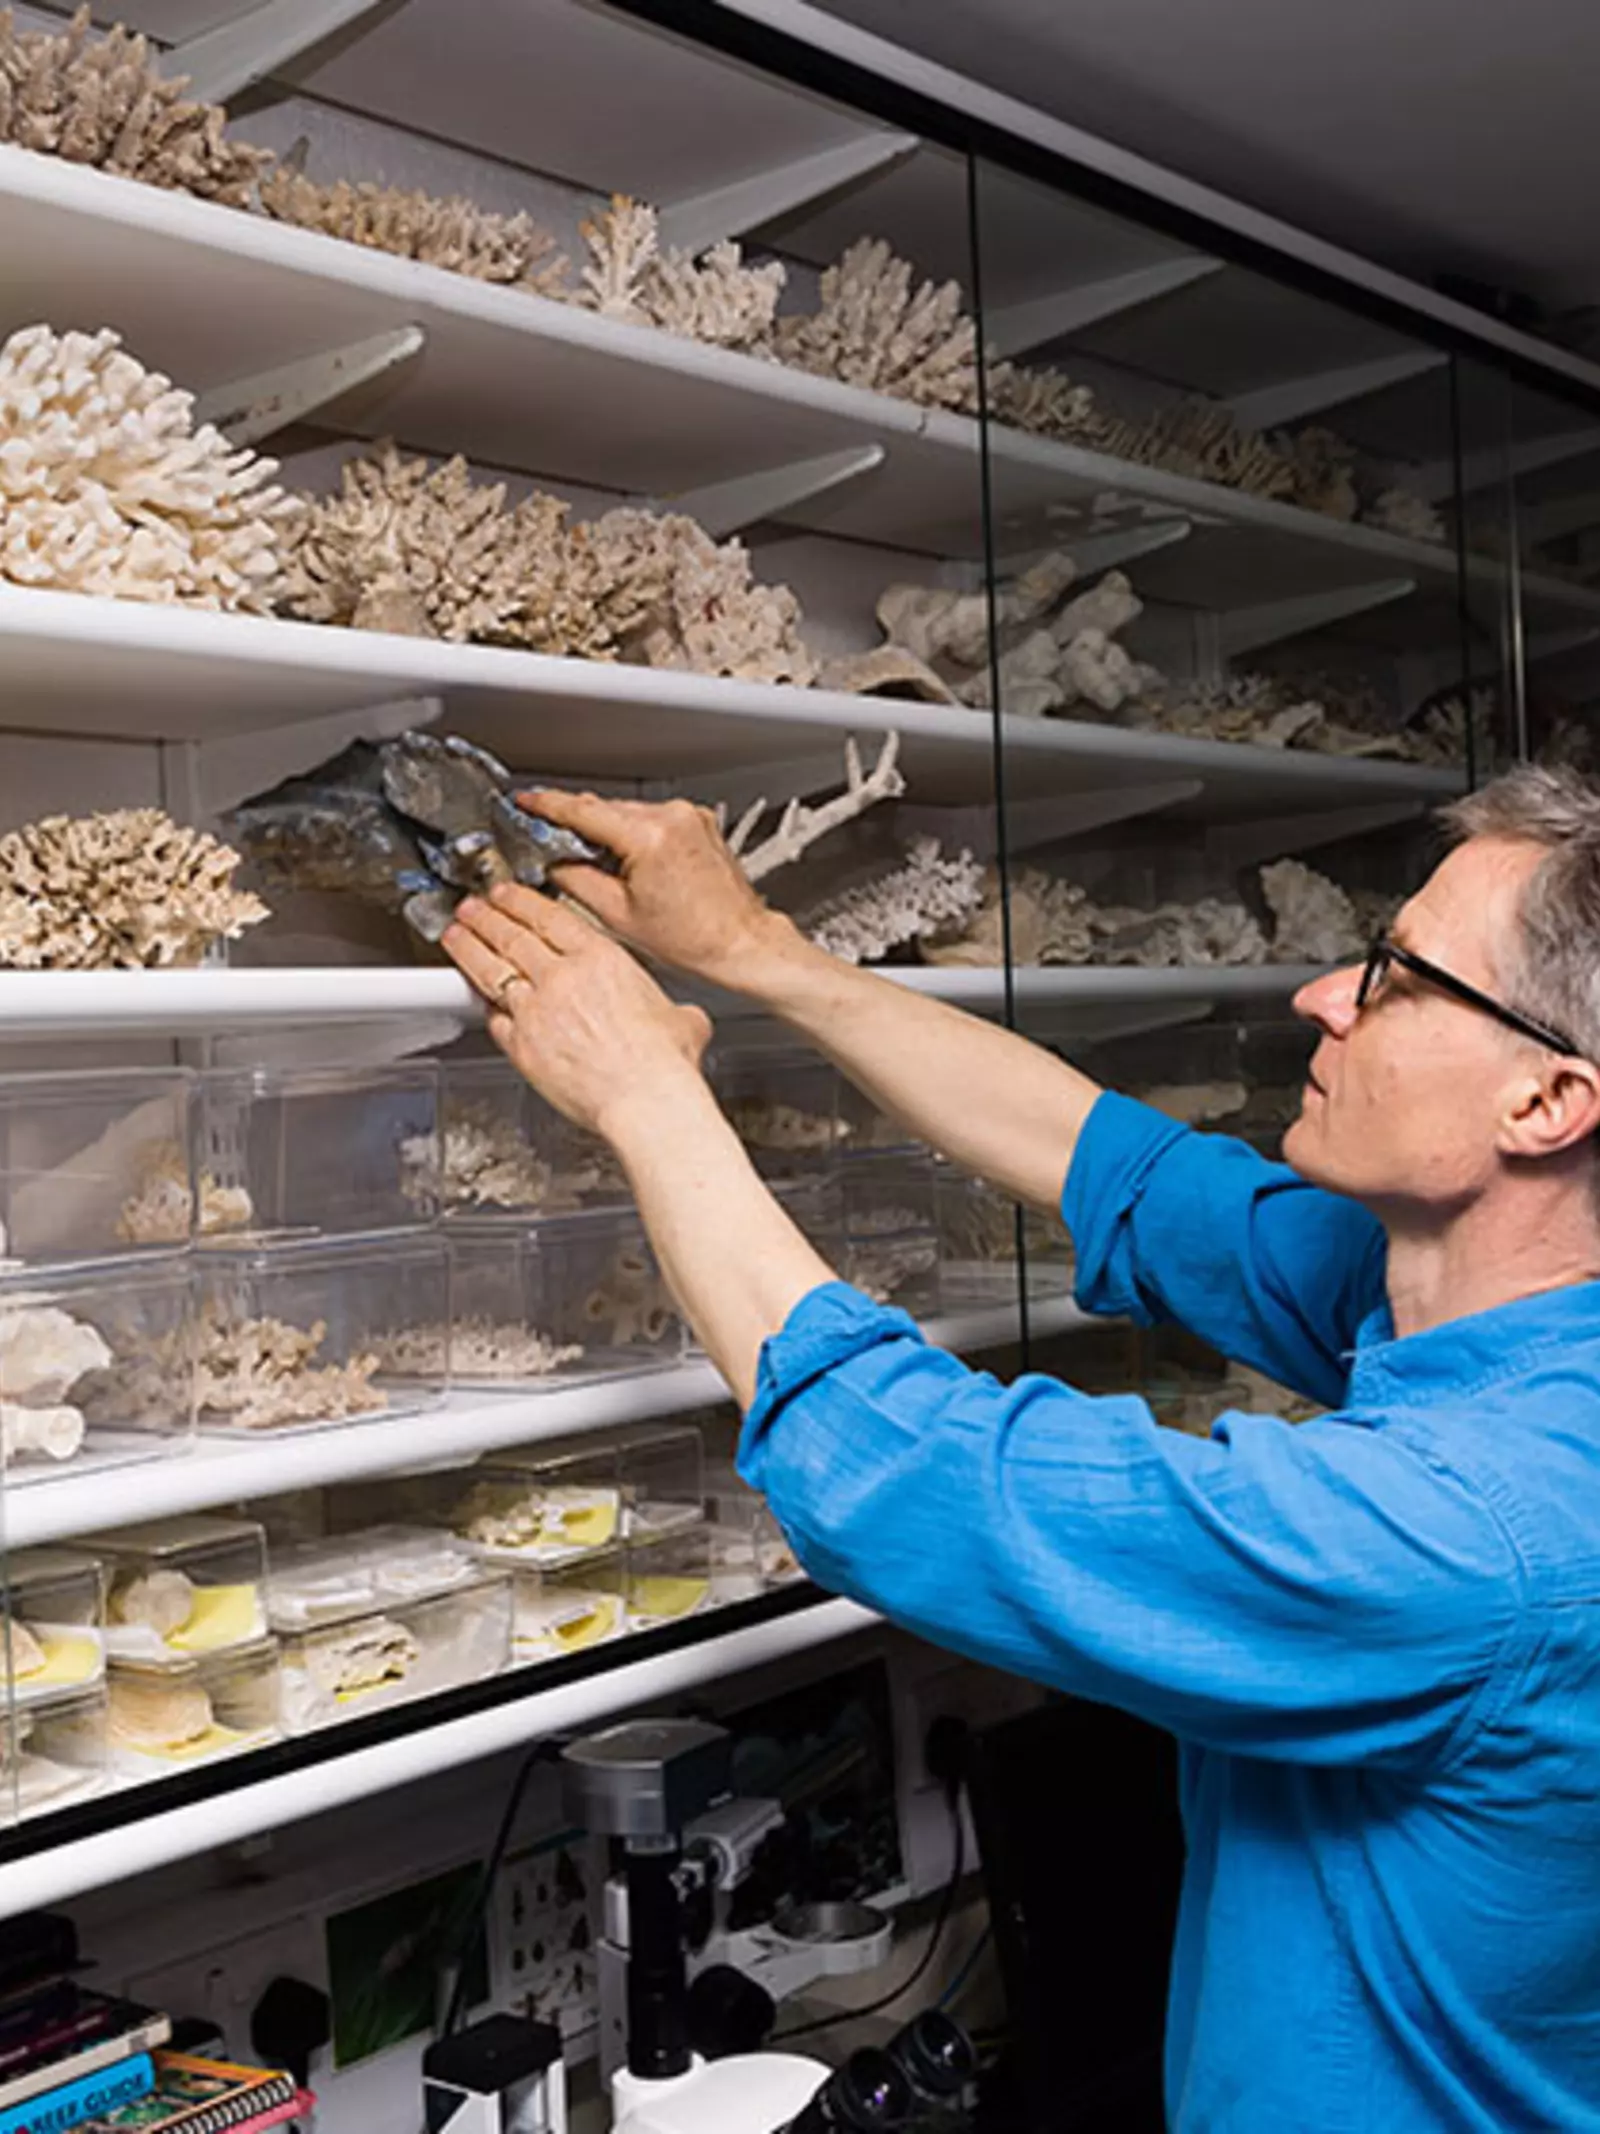 Senior curator Paul Pearce-Kelly places confiscated corals safely in a display case.